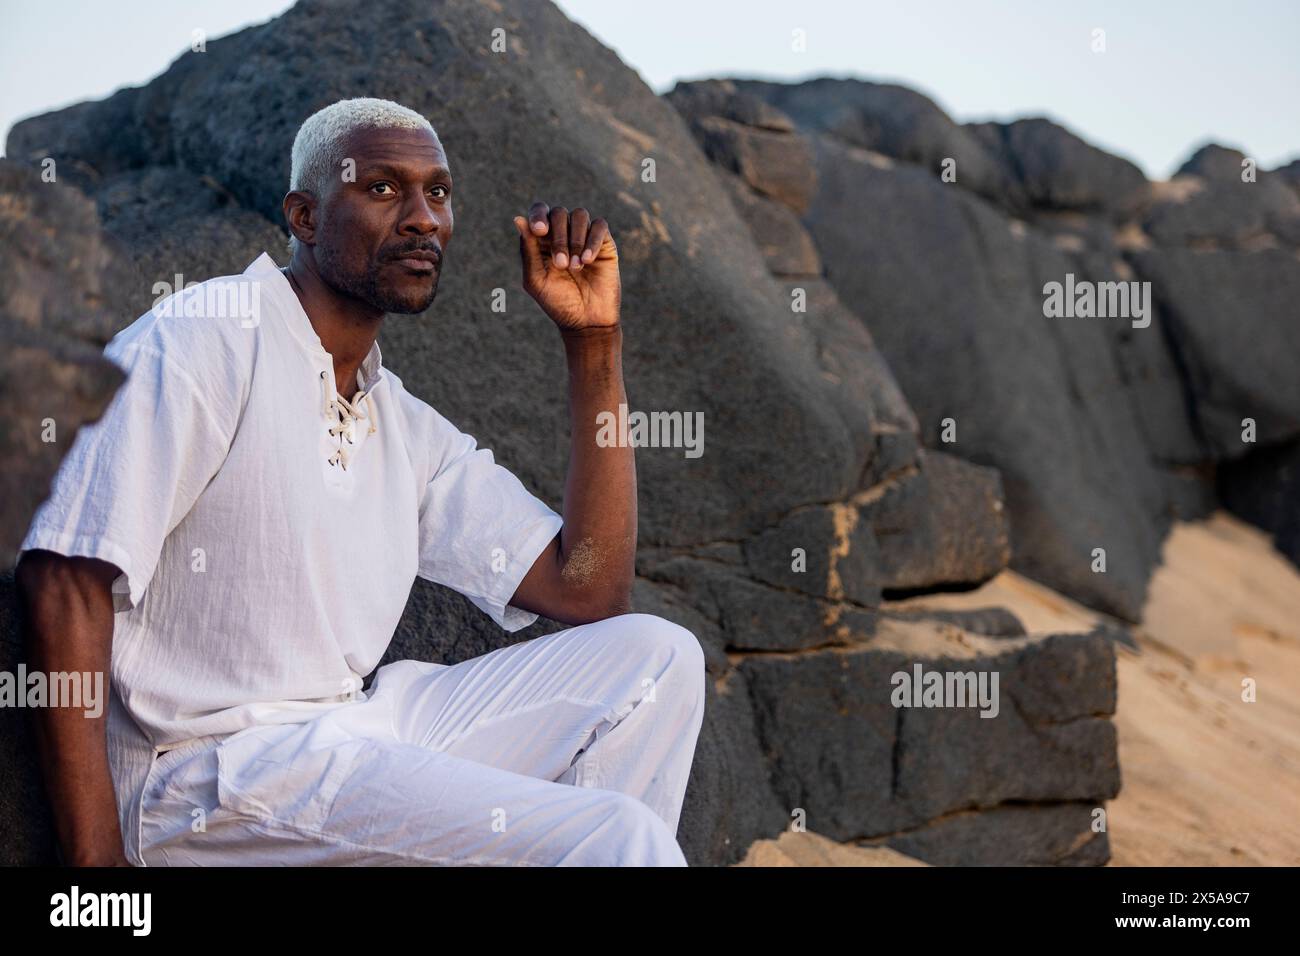 An elegant African American male model poses on a tranquil beach, dressed in white, exuding a peaceful aura against a backdrop of rocks Stock Photo